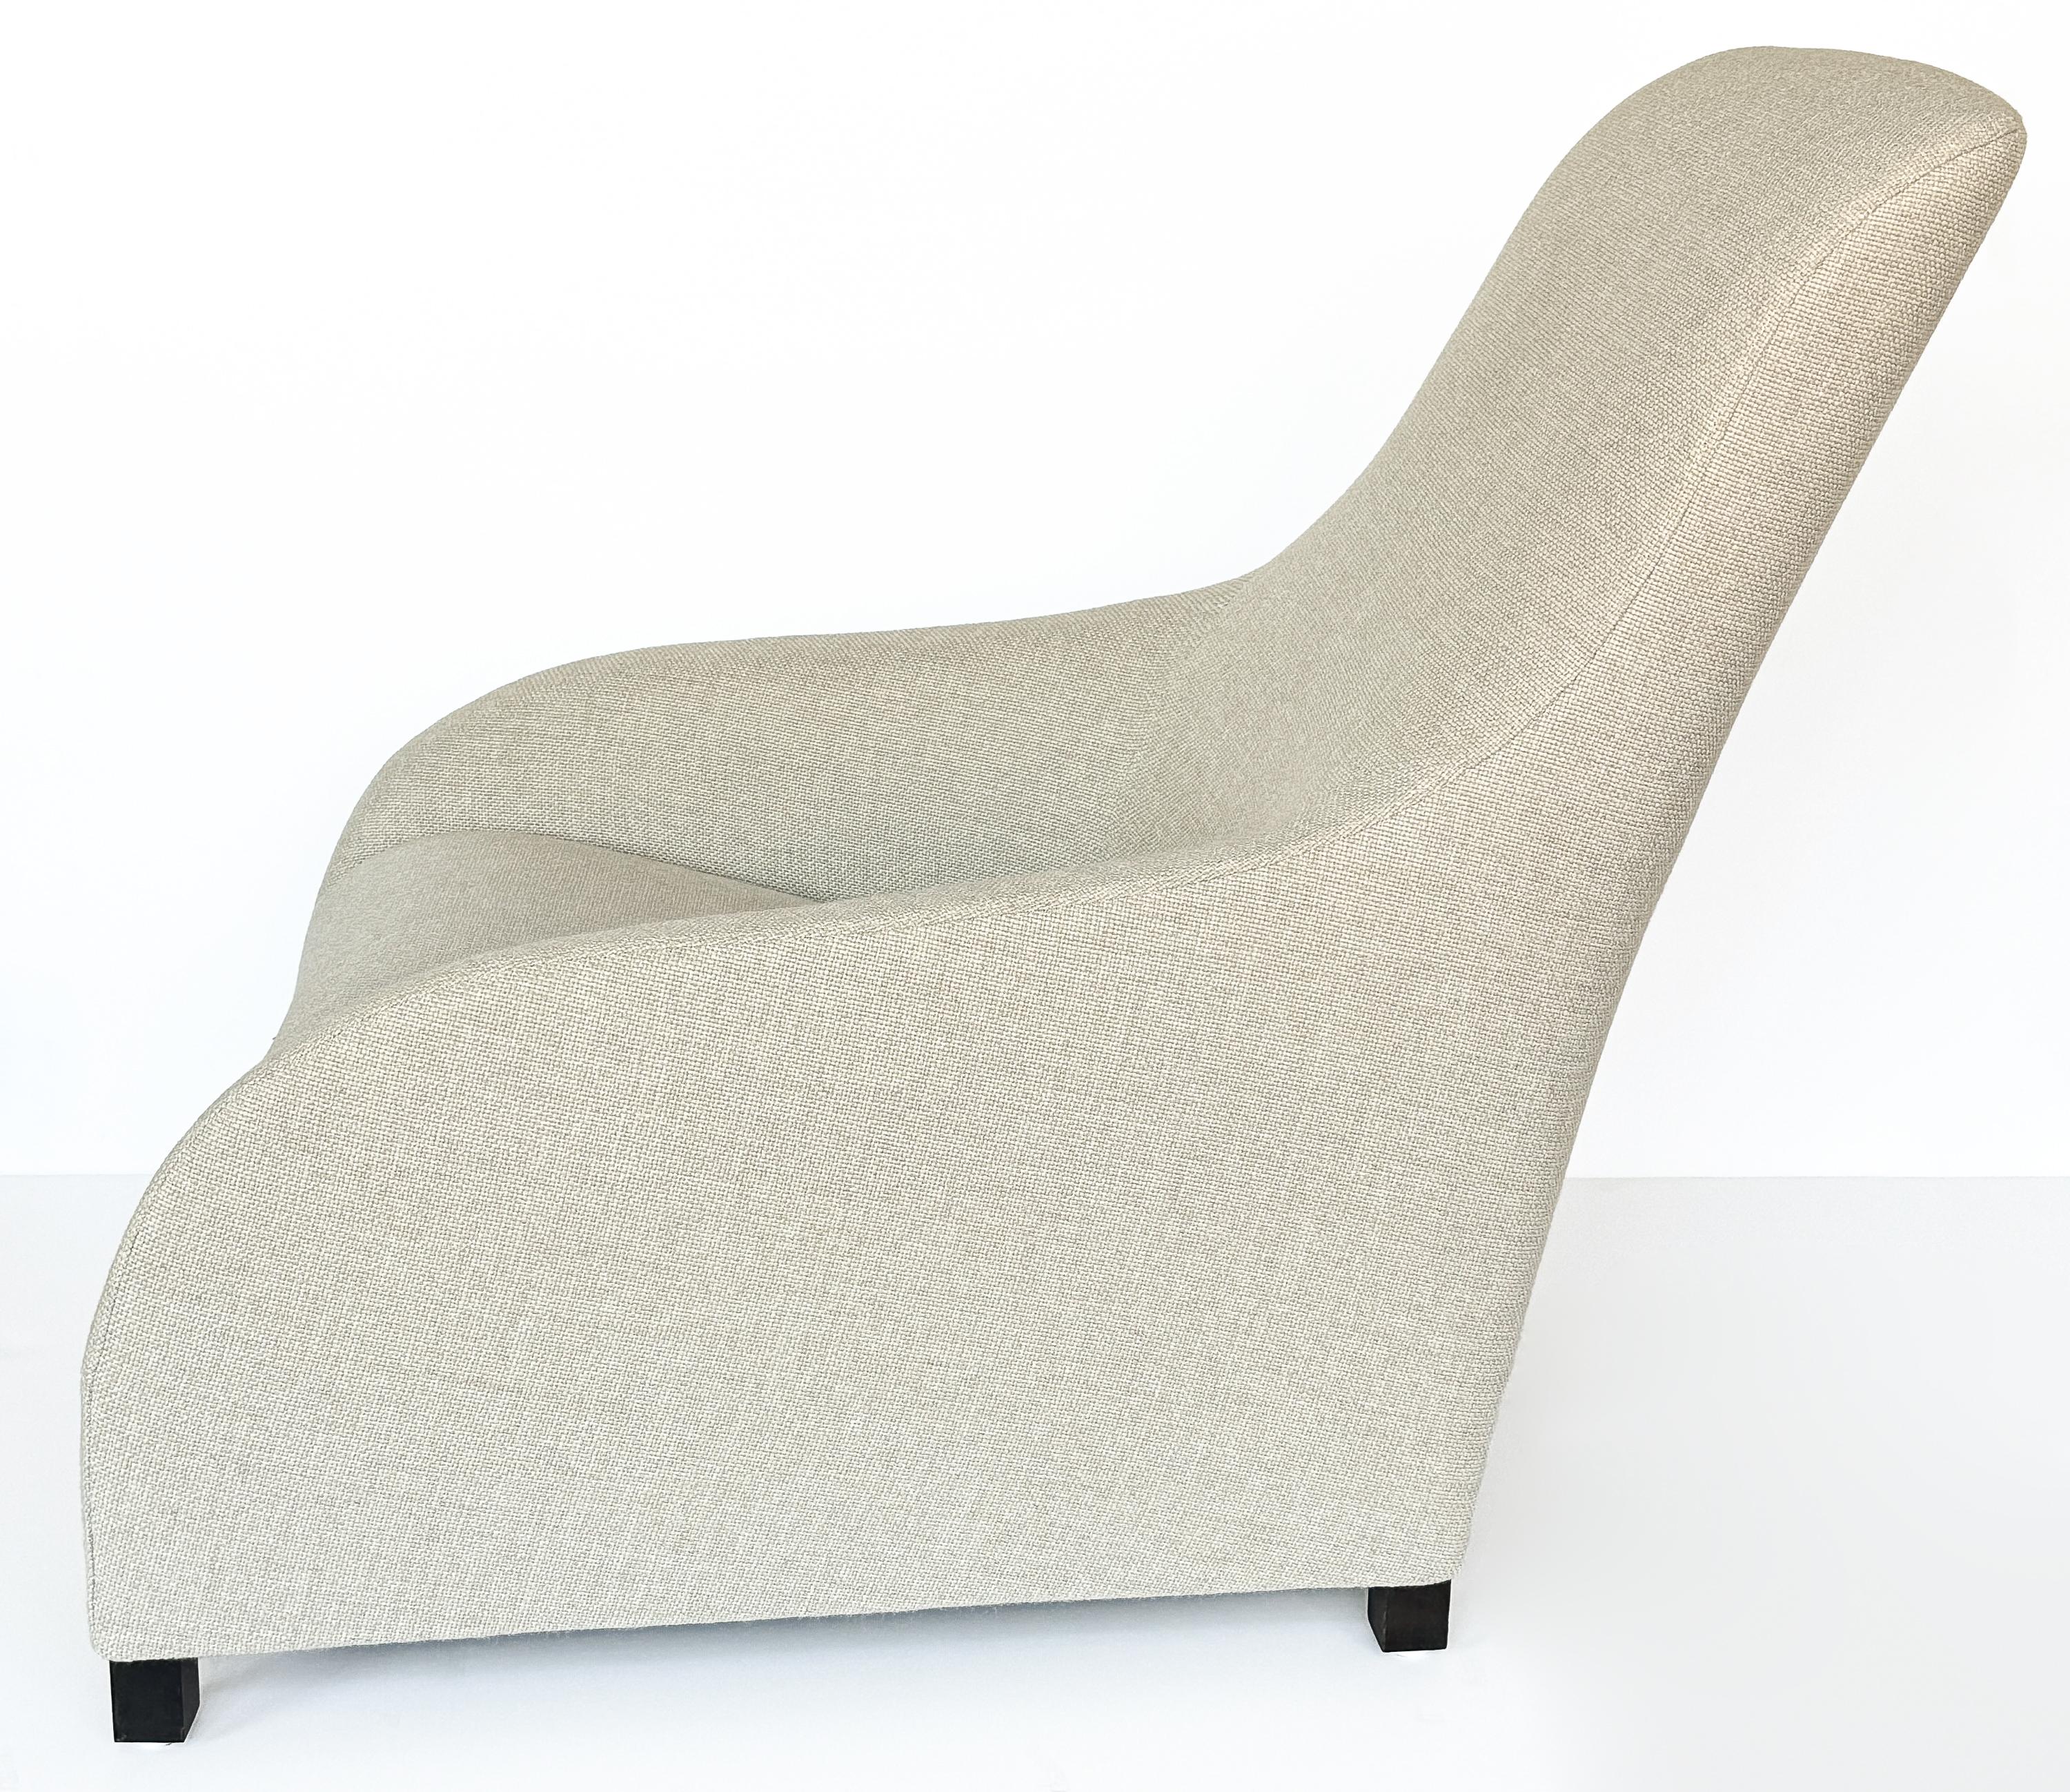 Stained Kalos Lounge Chair and Ottoman by Antonio Citterio for B&B Italia